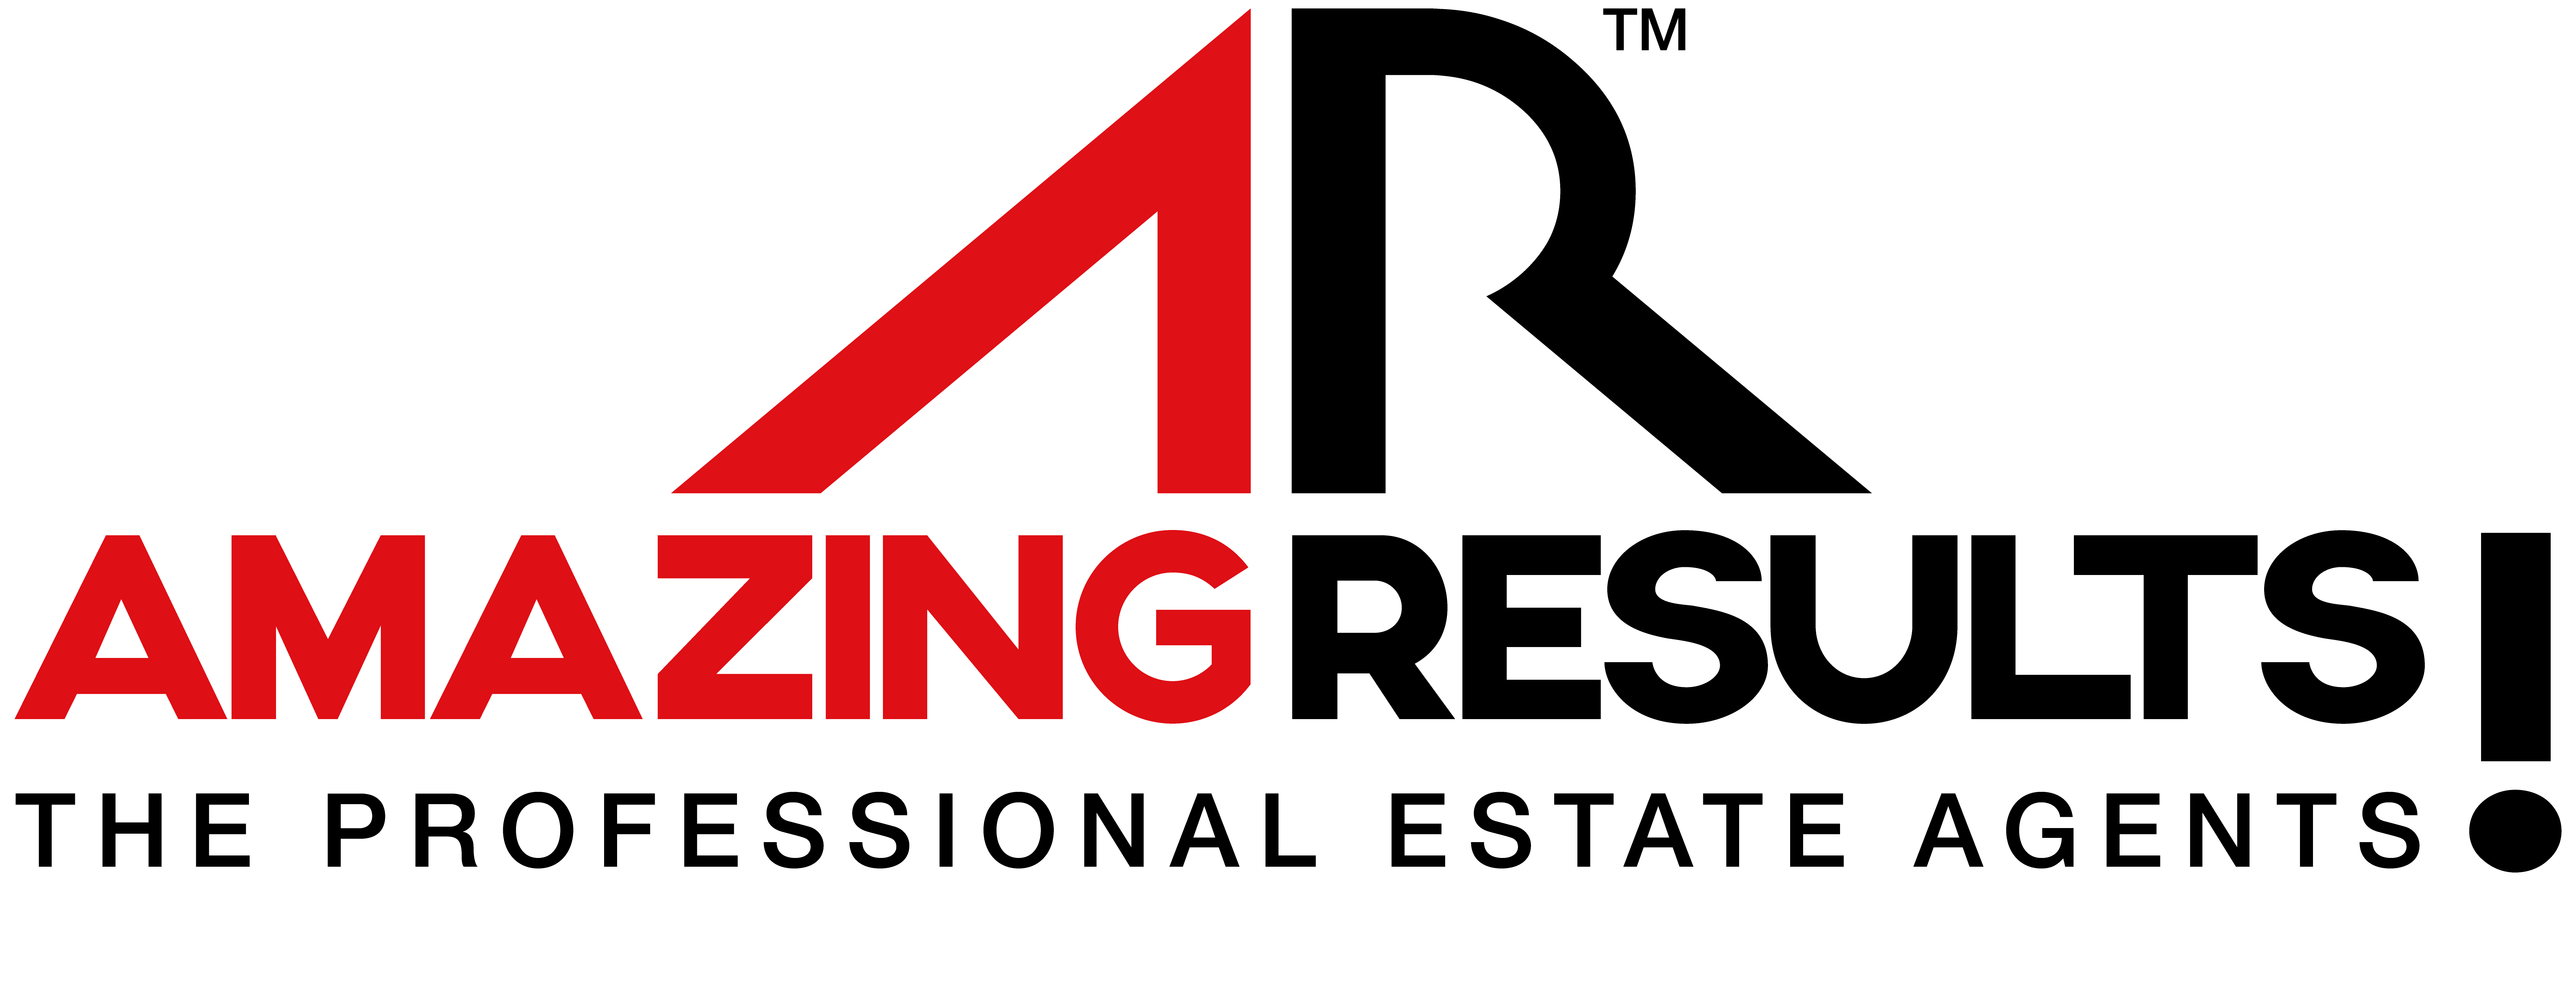 Most Amazing Company Logo - ESTATE AGENT job at AMAZING RESULTS! | Monster.co.uk